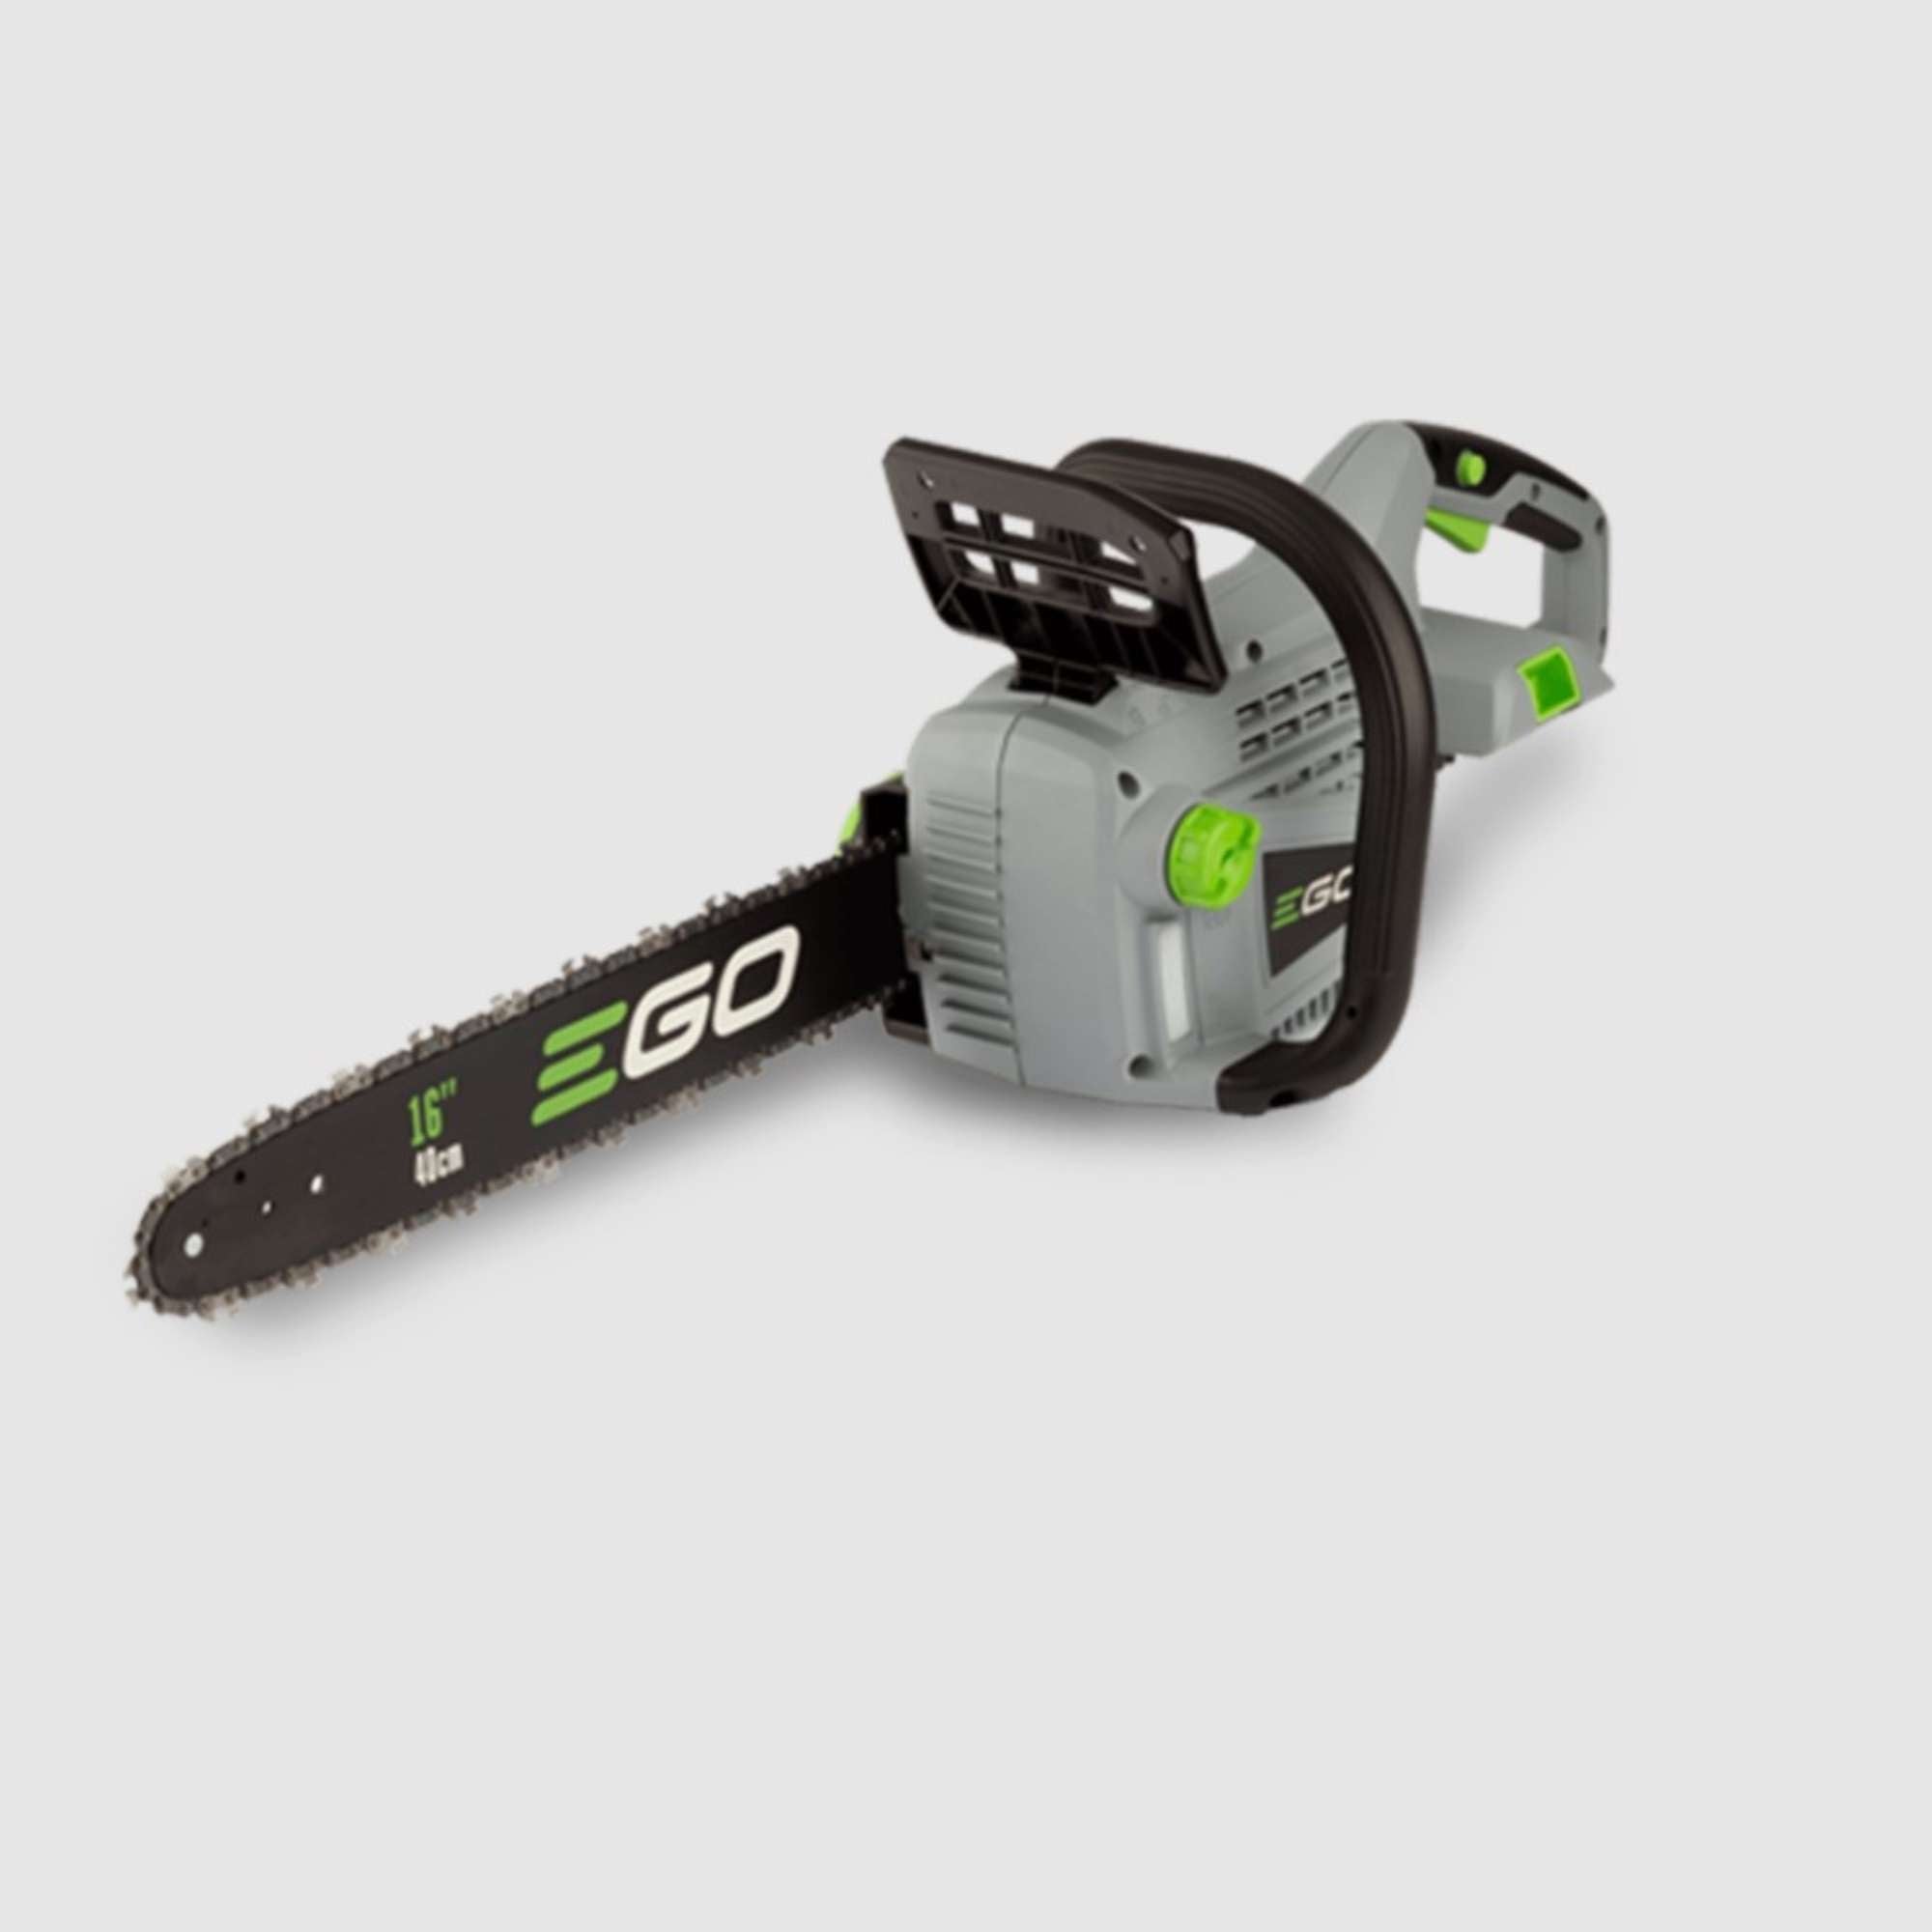 Battery powered chainsaw body only - Ego 57100 CS1610E